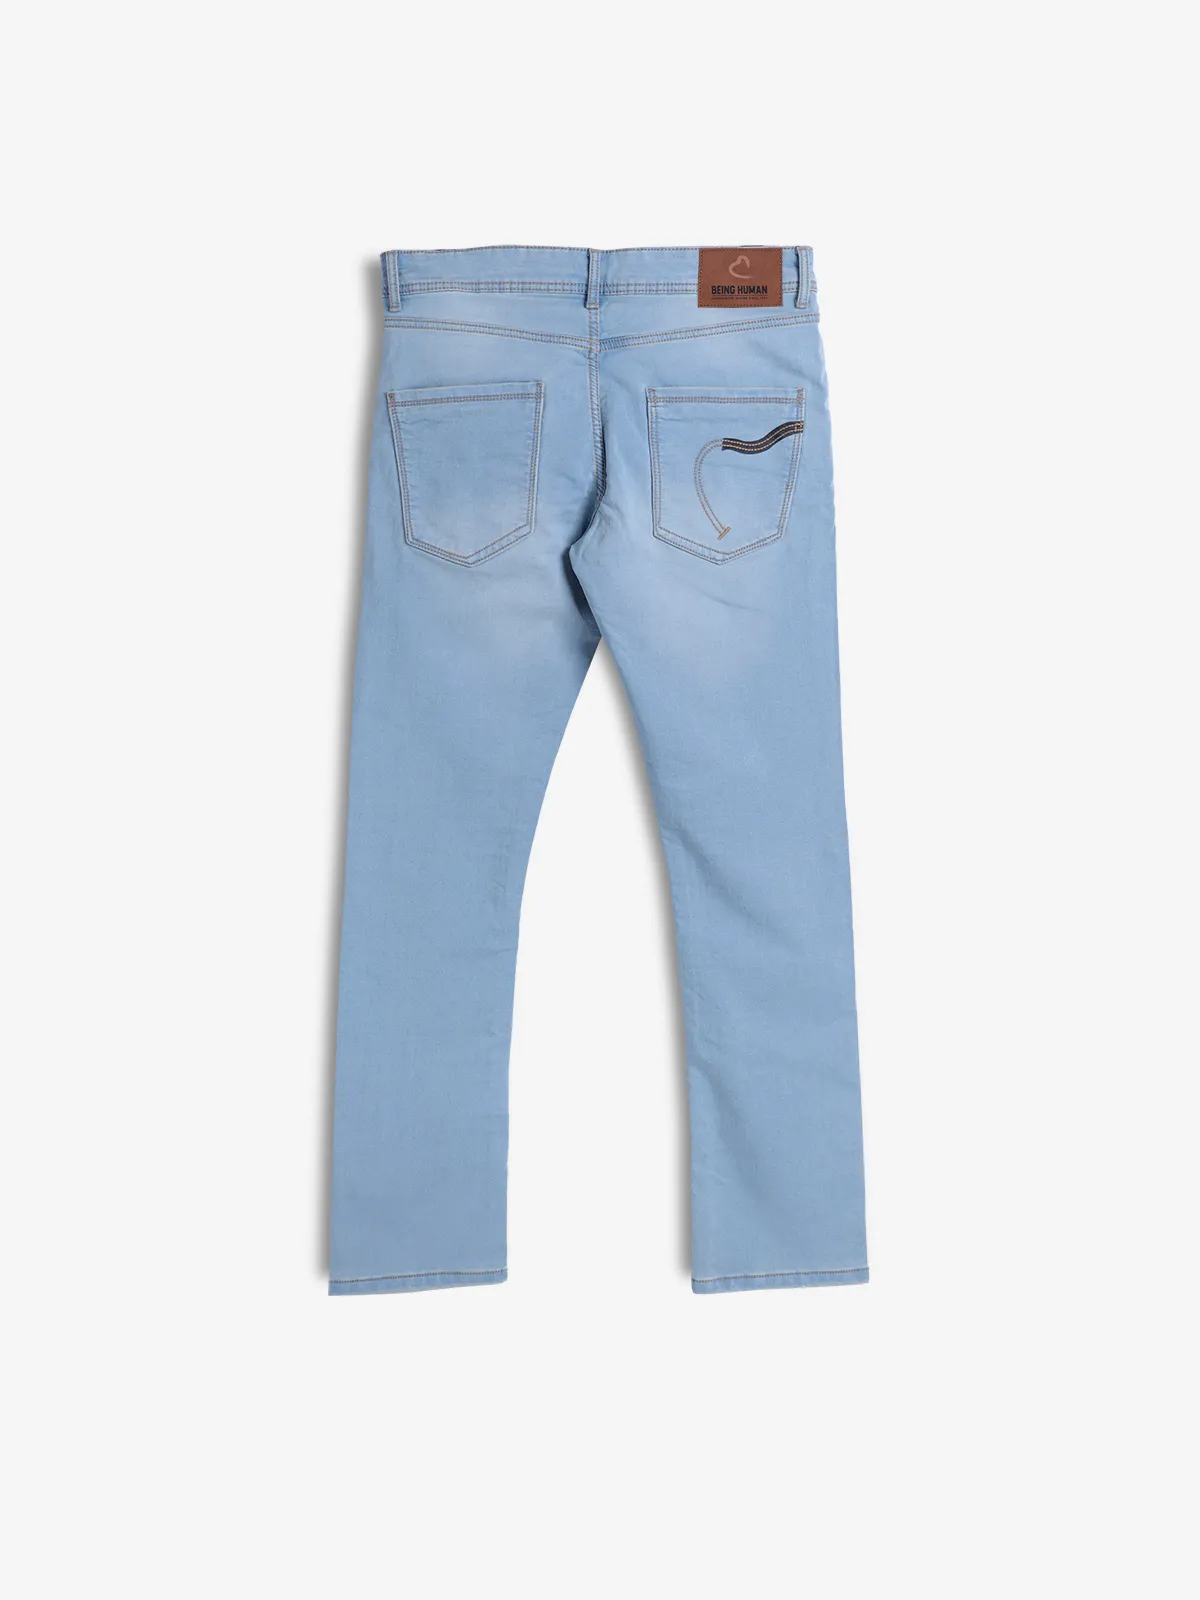 BEING HUMAN ice blue slim straight fit jeans